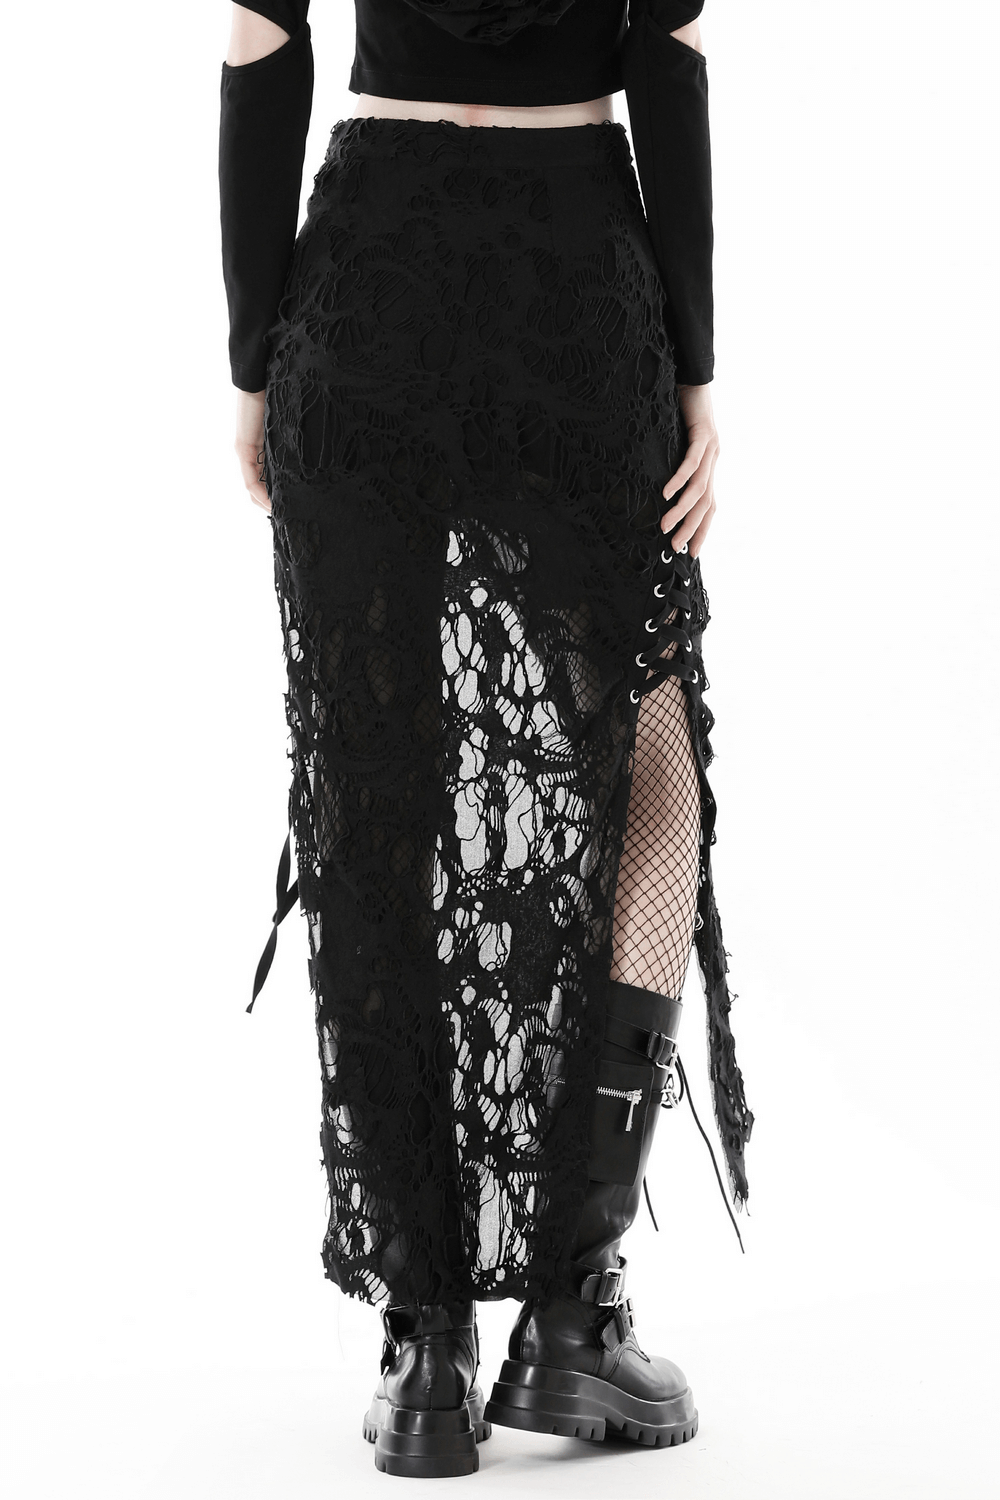 Elegant Gothic Lace Detailed Side-Laced Long Skirt